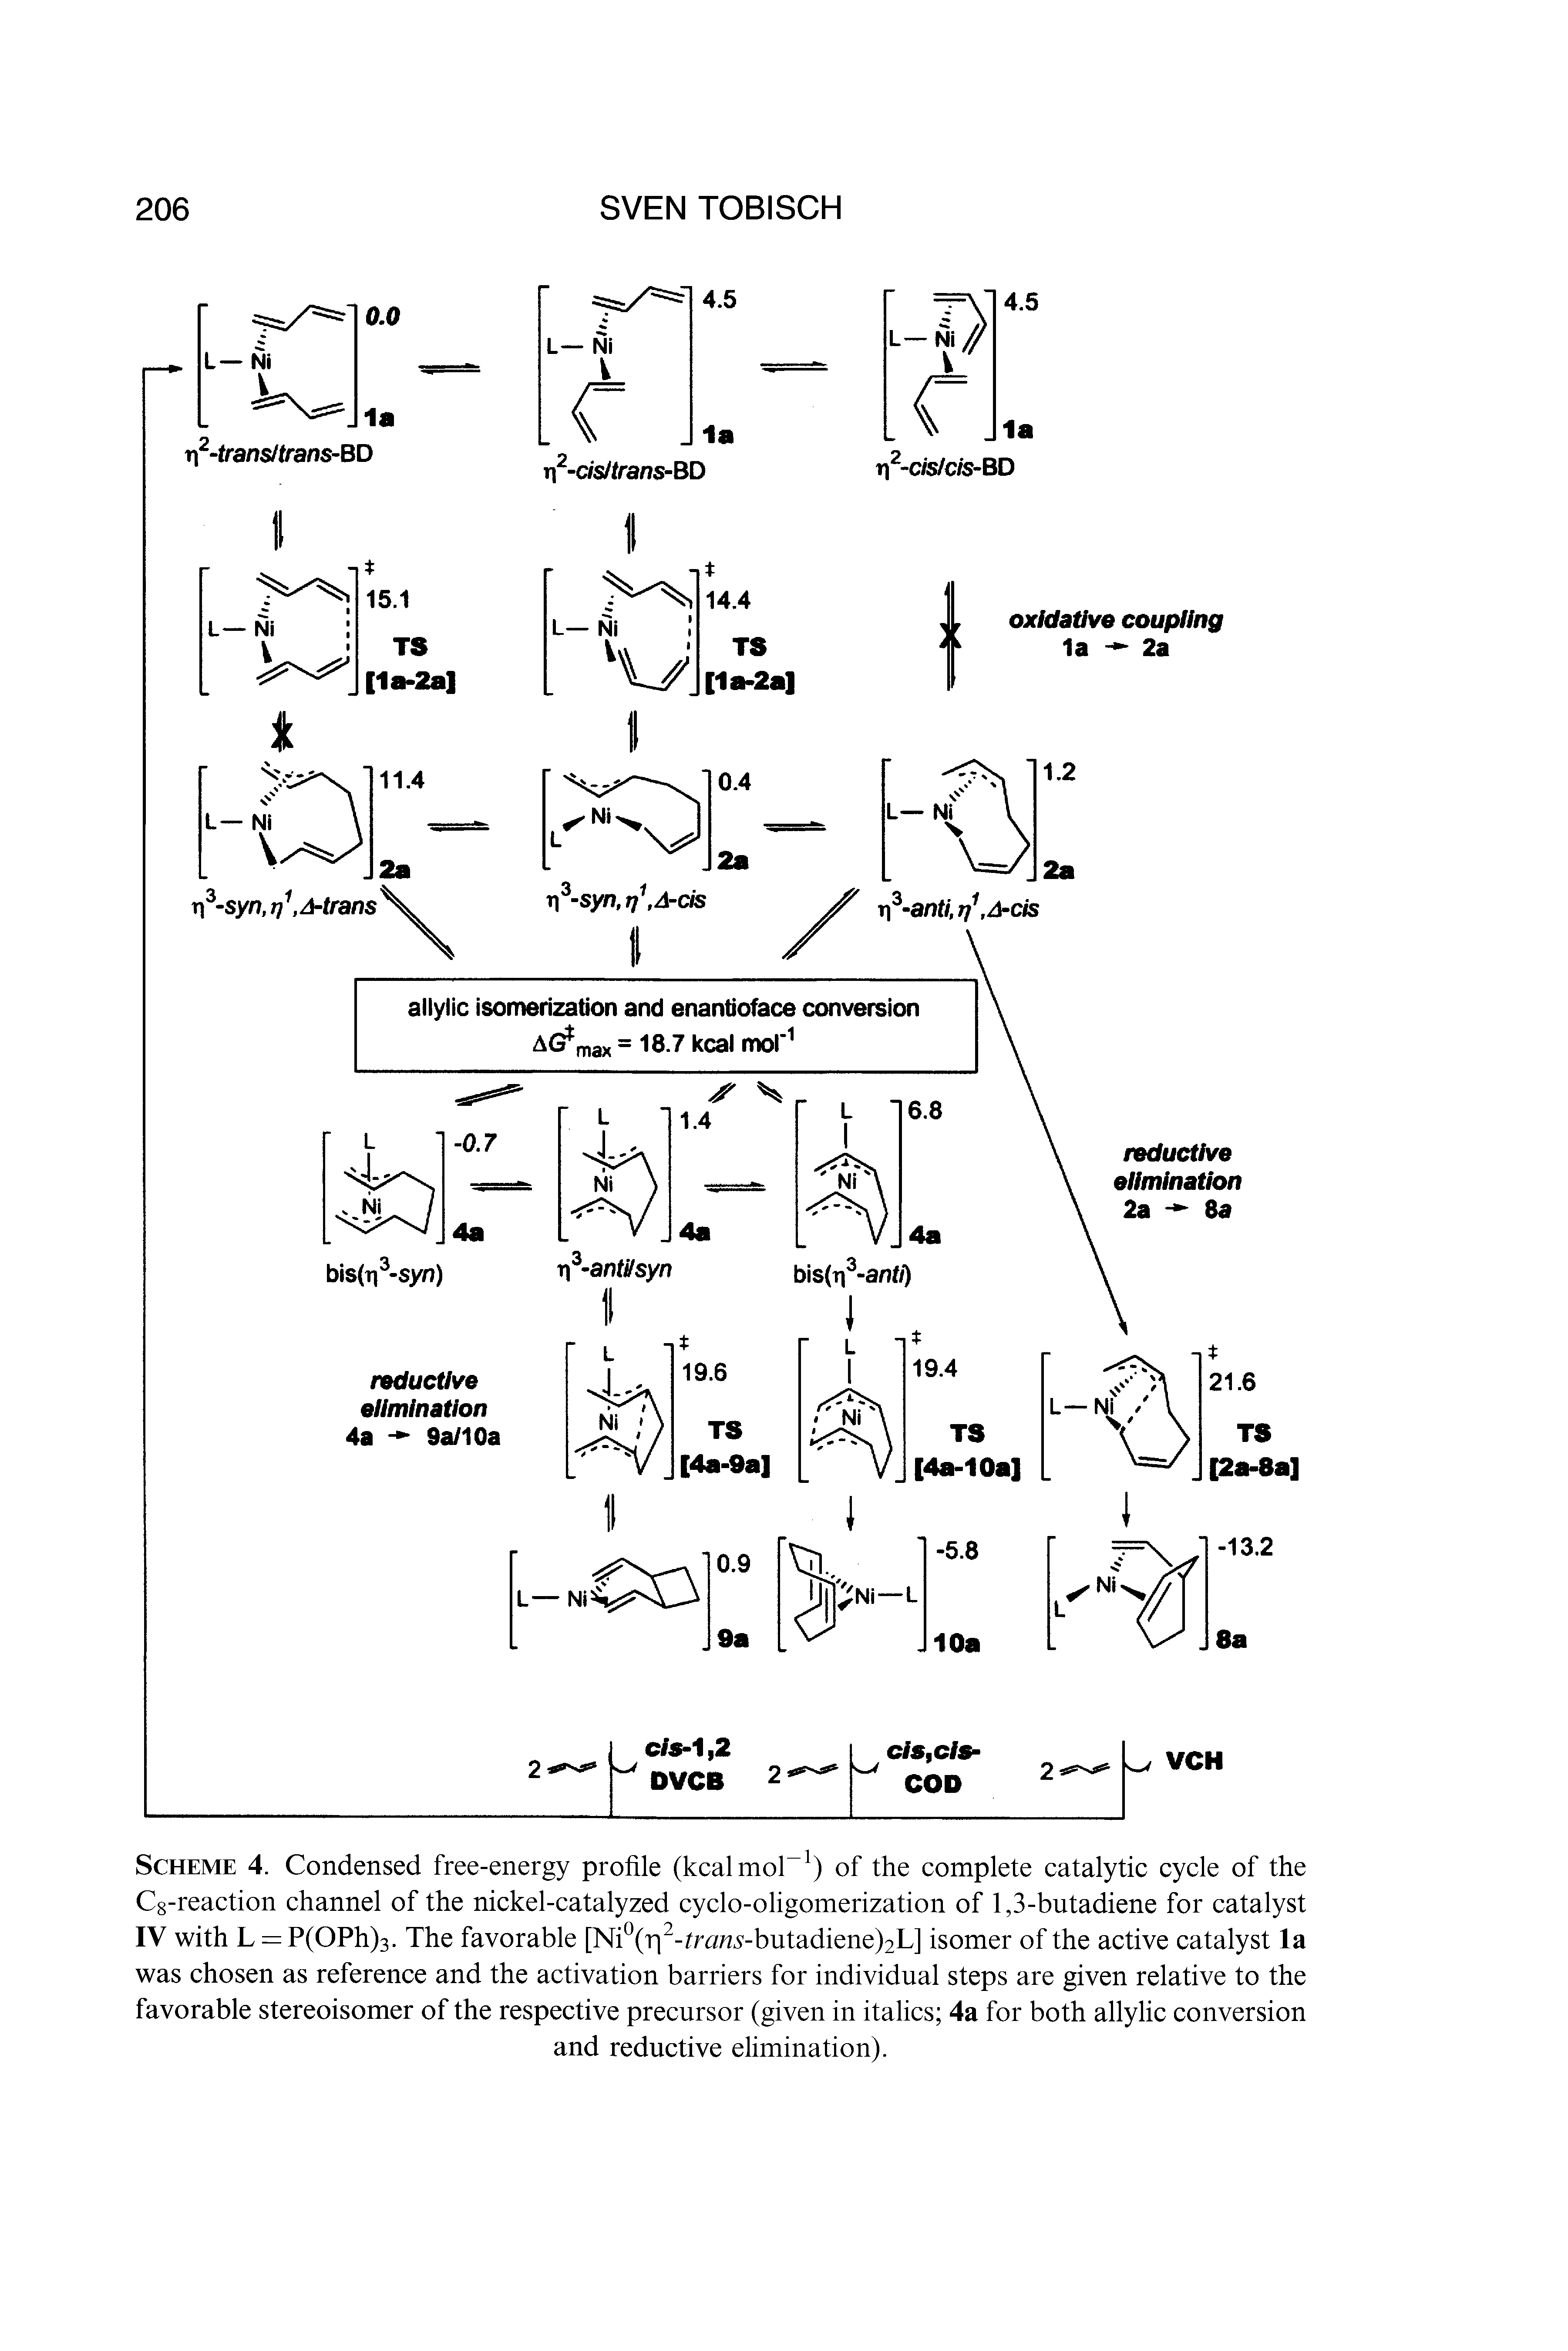 Scheme 4. Condensed free-energy profile (kcalmol-1) of the complete catalytic cycle of the C8-reaction channel of the nickel-catalyzed cyclo-oligomerization of 1,3-butadiene for catalyst IV with L = P(OPh)3. The favorable [Ni°(p2-tr<ms-butadiene)2L] isomer of the active catalyst la was chosen as reference and the activation barriers for individual steps are given relative to the favorable stereoisomer of the respective precursor (given in italics 4a for both allylic conversion...